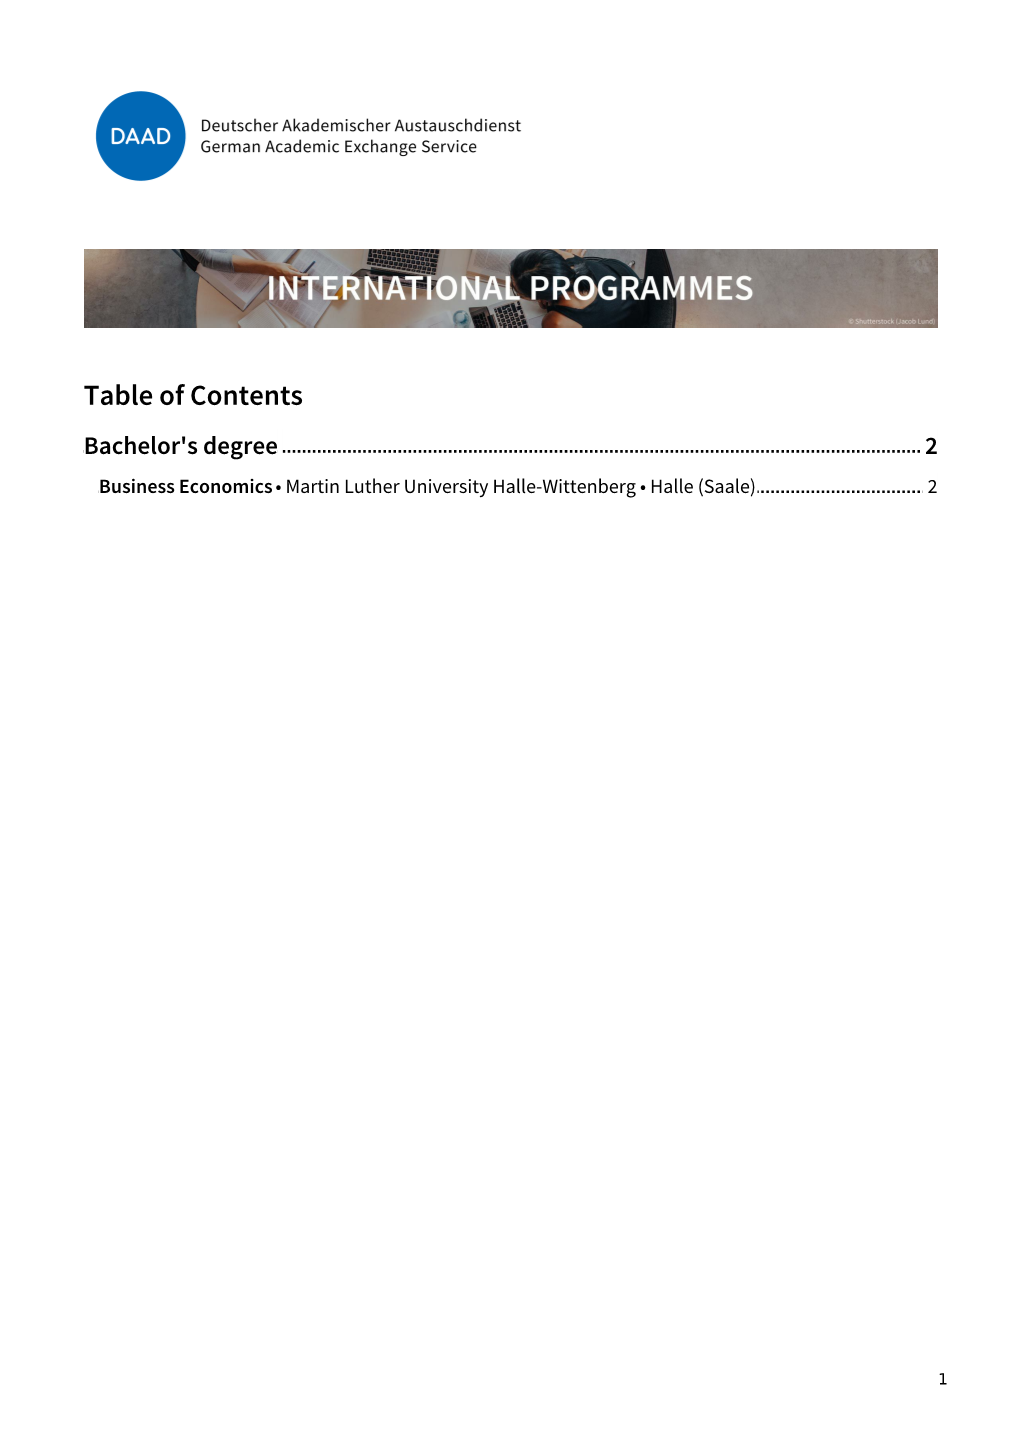 Table of Contents Bachelor's Degree 2 Business Economics • Martin Luther University Halle-Wittenberg • Halle (Saale) 2